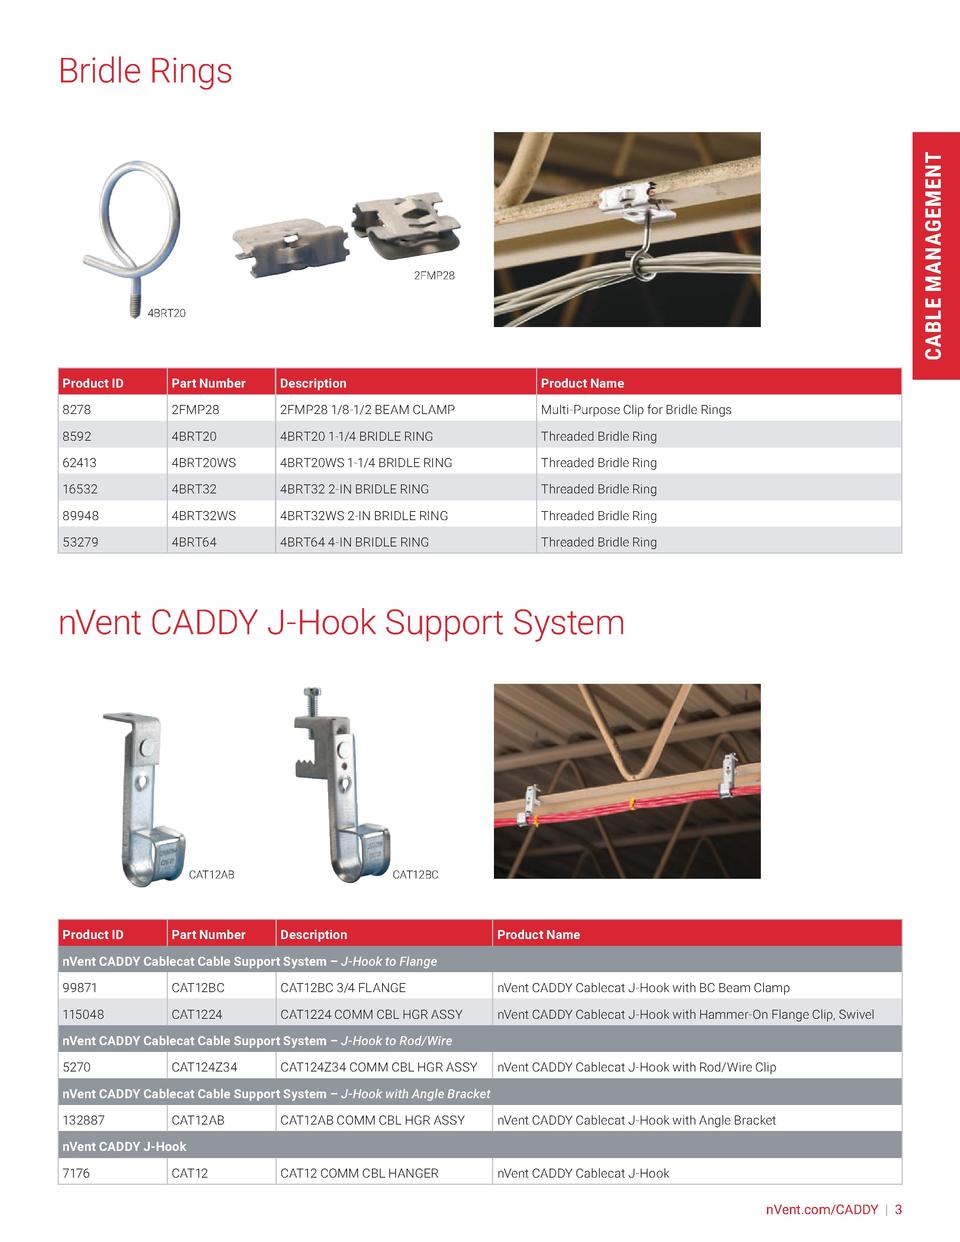 nVent CADDY Fastening Solutions